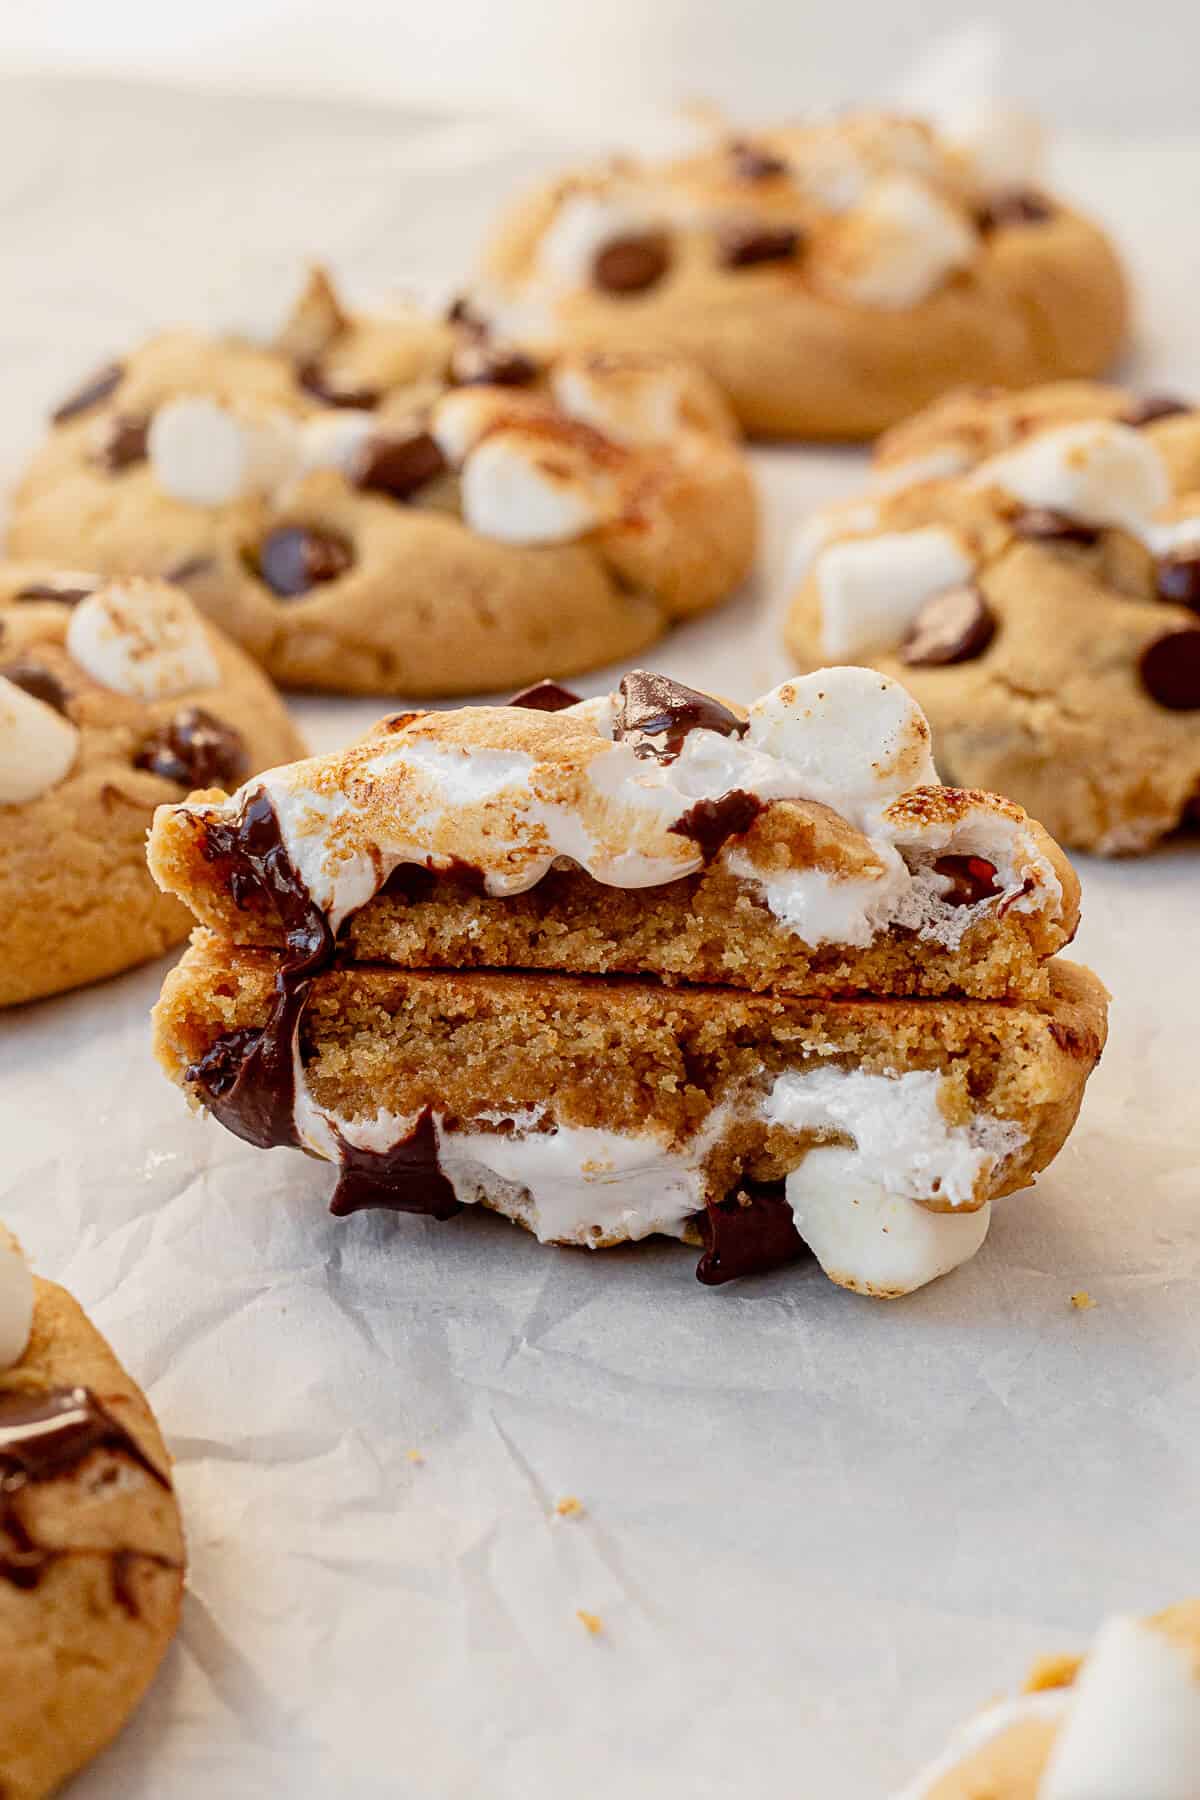 gooey toasted marshmallow and chocolate chips inside a peanut butter pudding cookie